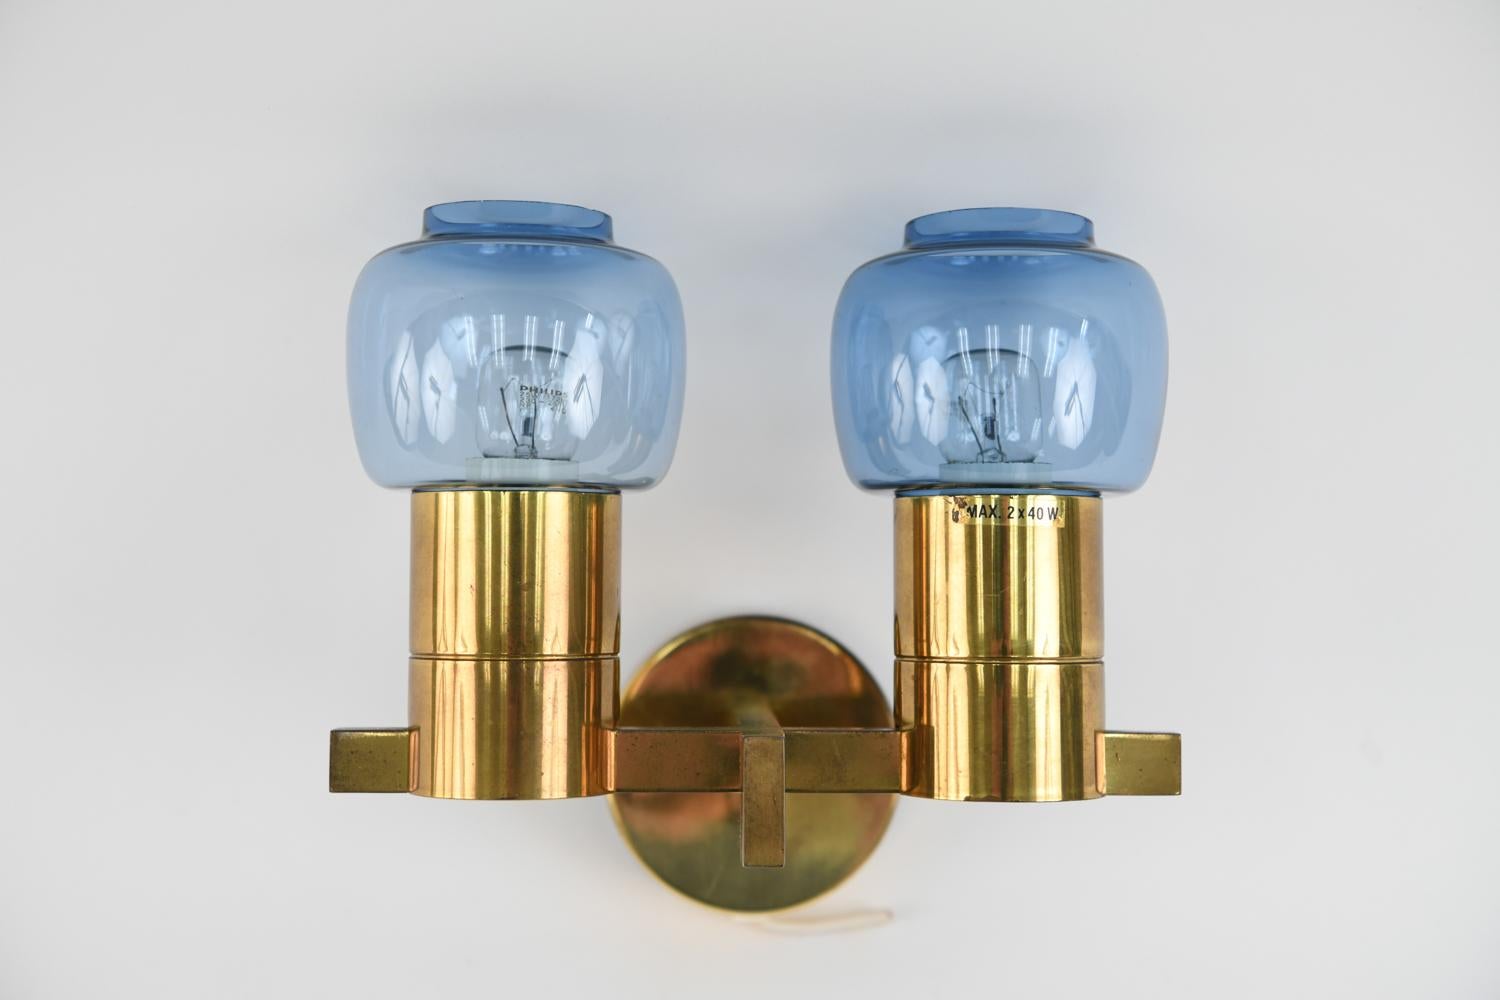 This double-arm sconce is model V-212 designed by Hans Agne Jakobsson. Featuring a brass base and glass globe shades, this Danish mid-century sconce is an attractive, iconic design.